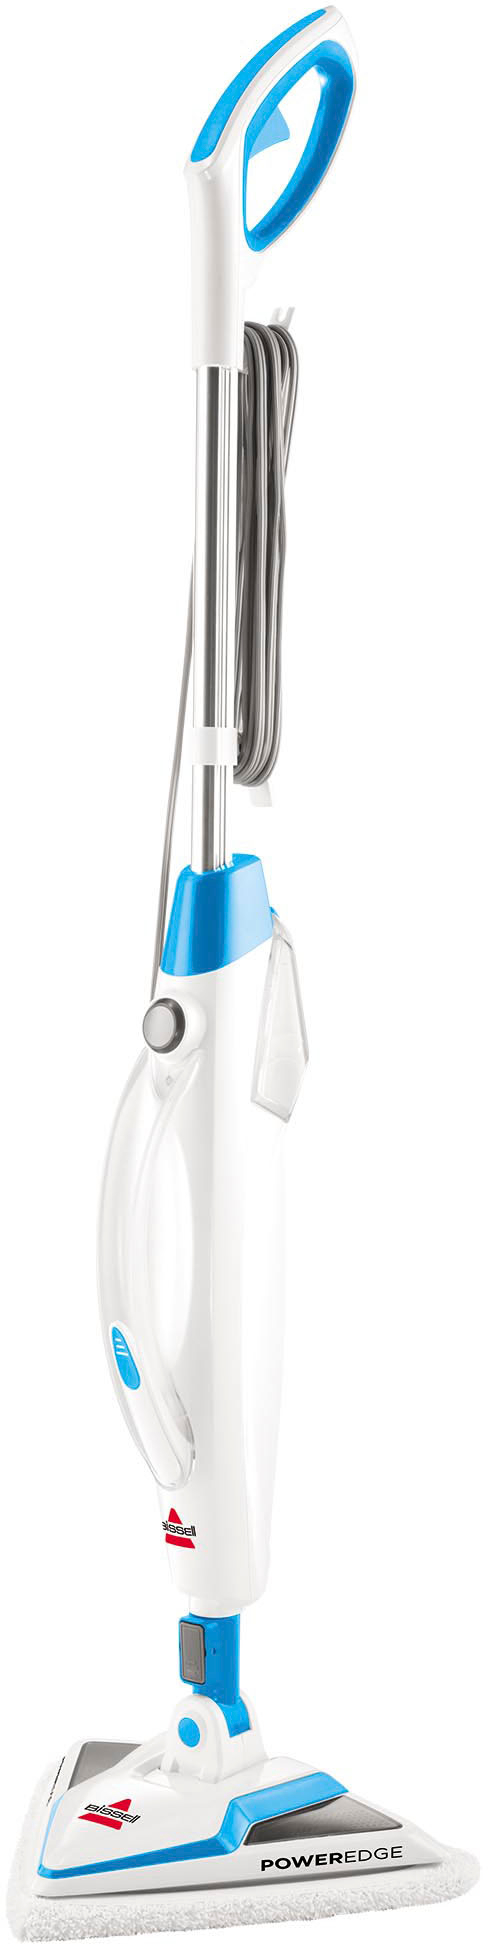 Angle View: BISSELL - PowerEdge Lift-Off 2-in-1 Sanitizing Steam Mop - Basanova Blue with White Accents